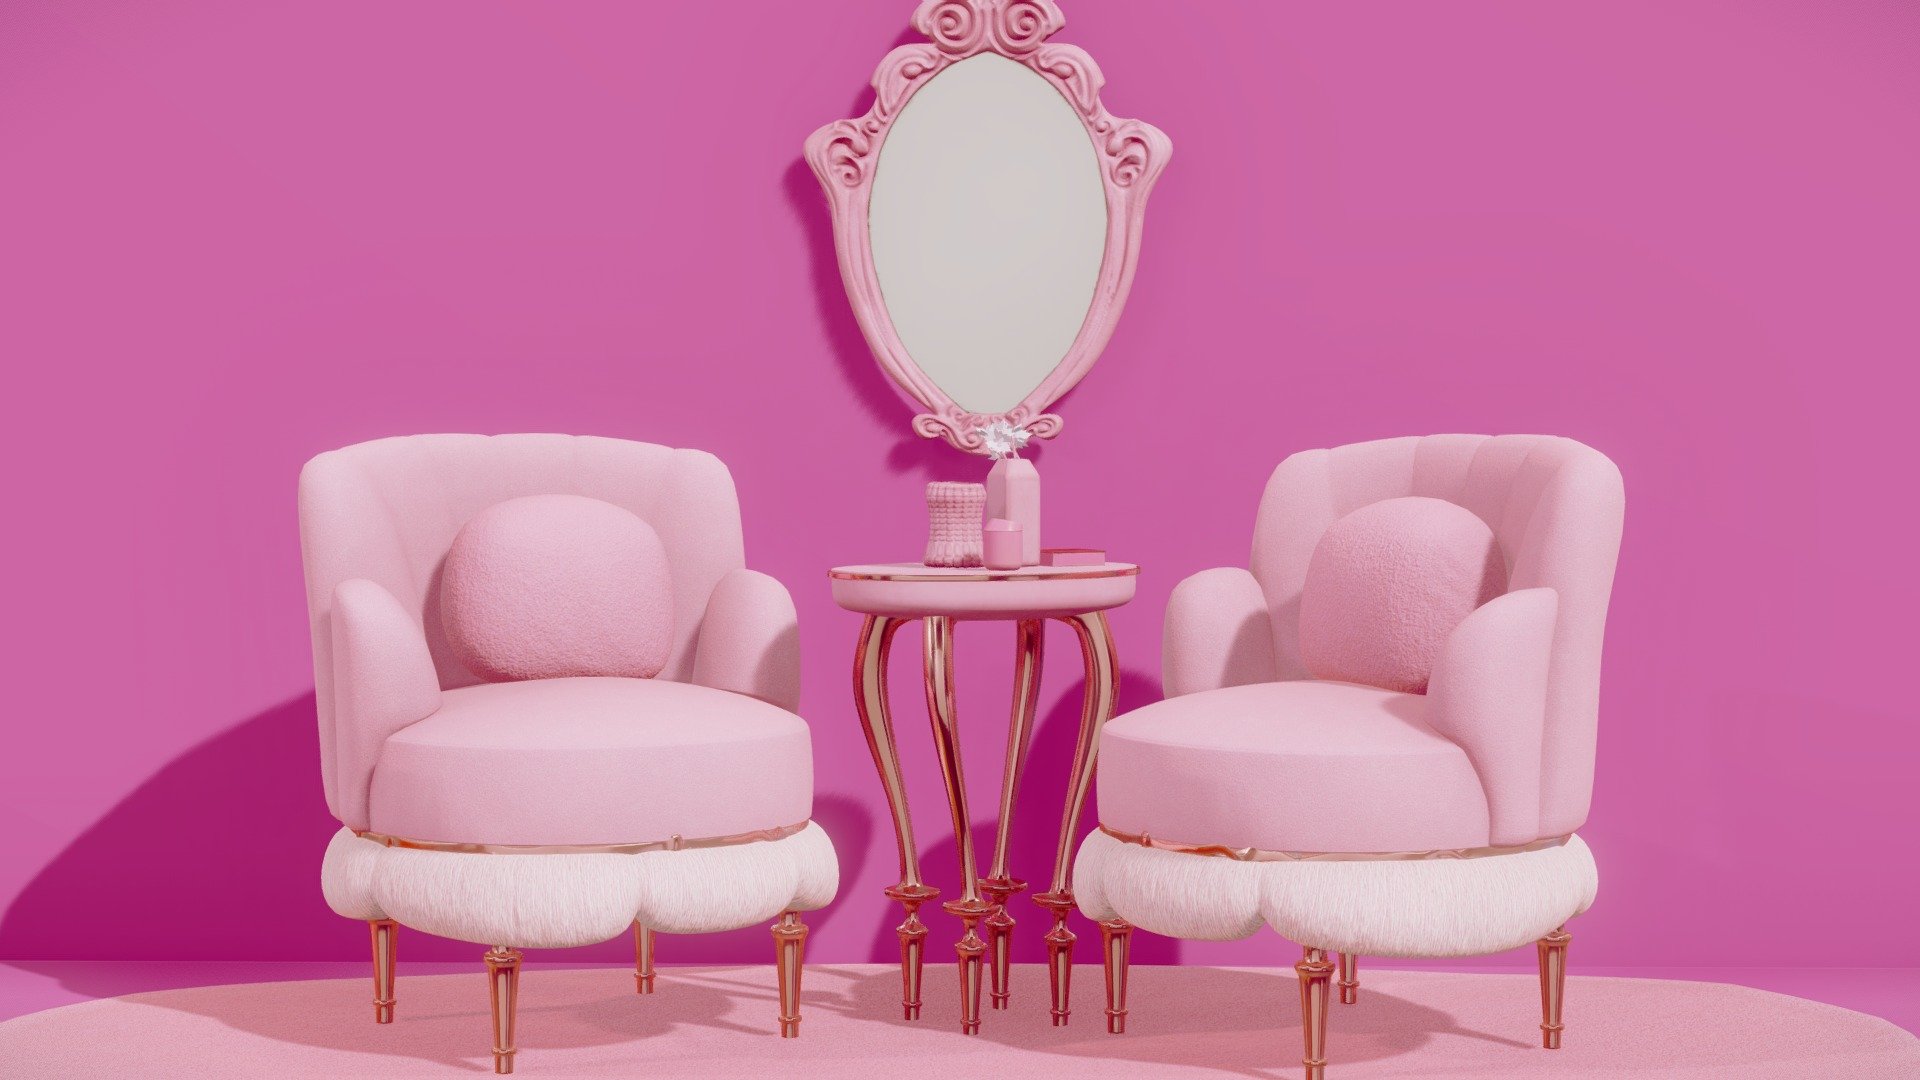 Set of sofa, mirror, rug and side table in bubblegum pink barbiecore style. Modern and elegant design. The sofa in pink velvet is cozy, the wall mirror has relief details. Perfect for a touch of sophistication and color in any space.

My Store
https://sketchfab.com/JoRCS/store

Include additional files of the objects separated in the center and at a scale of centimeters, Obj and Fbx fotmat.
High-quality PBR textures in png format 3d model